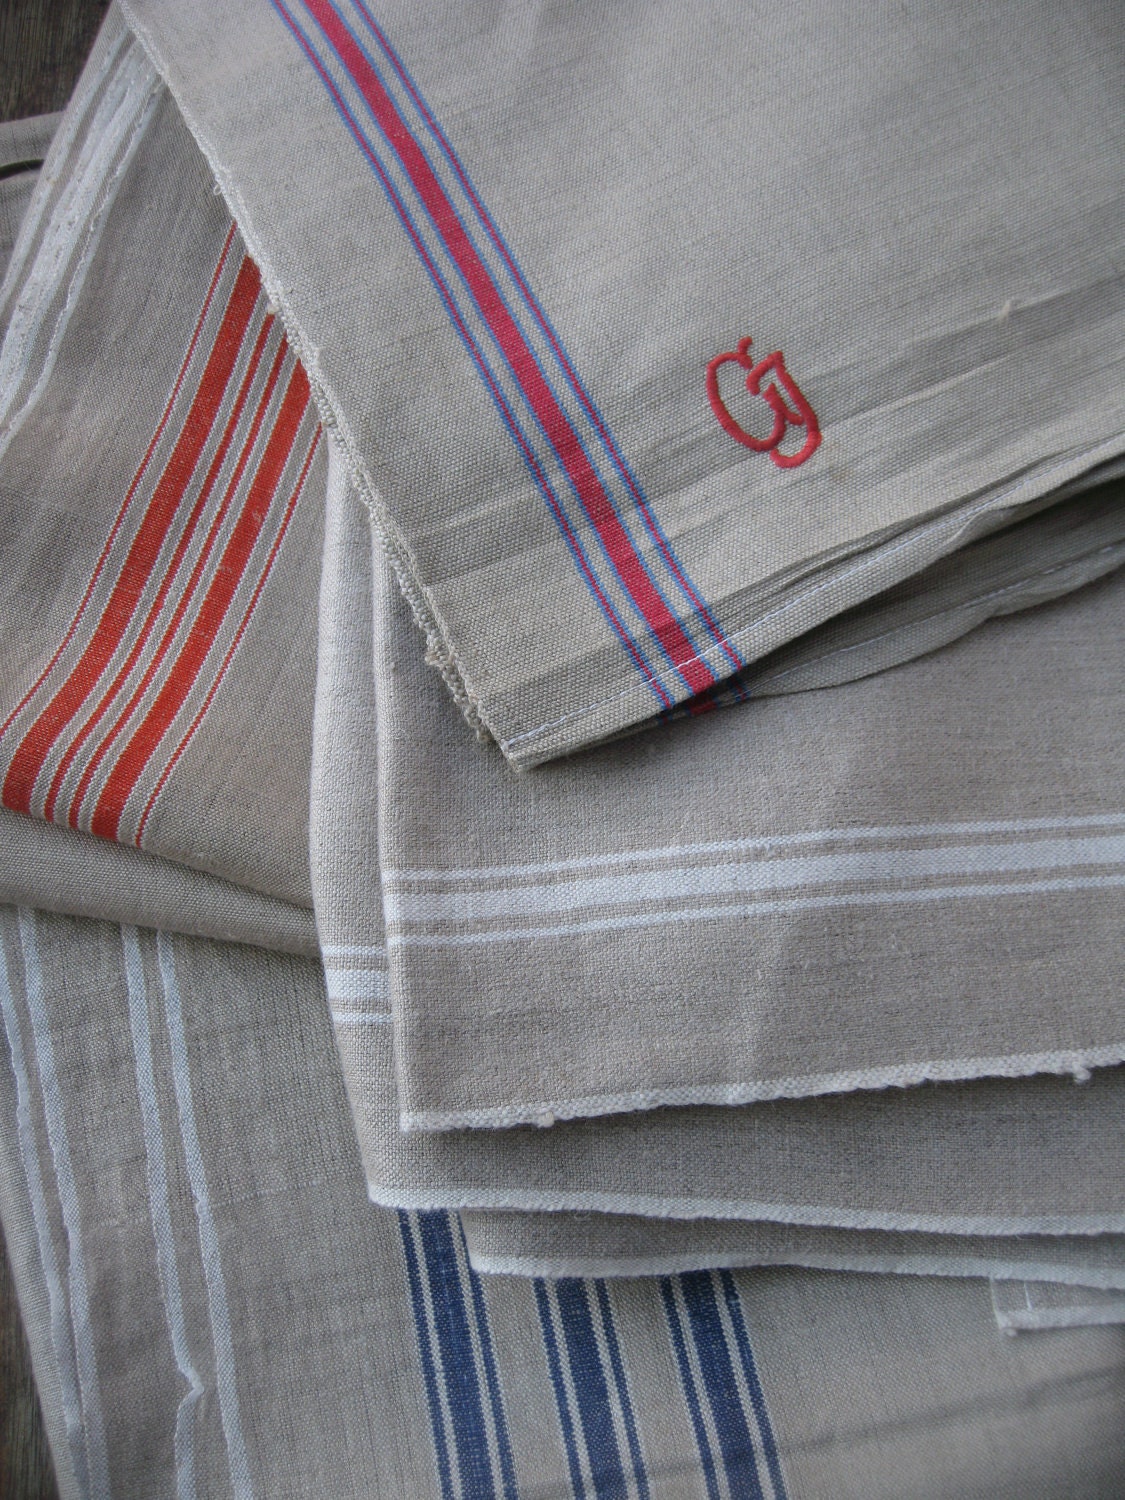 Vintage European Monogrammed Linen Tablecloth with blue and red stripes